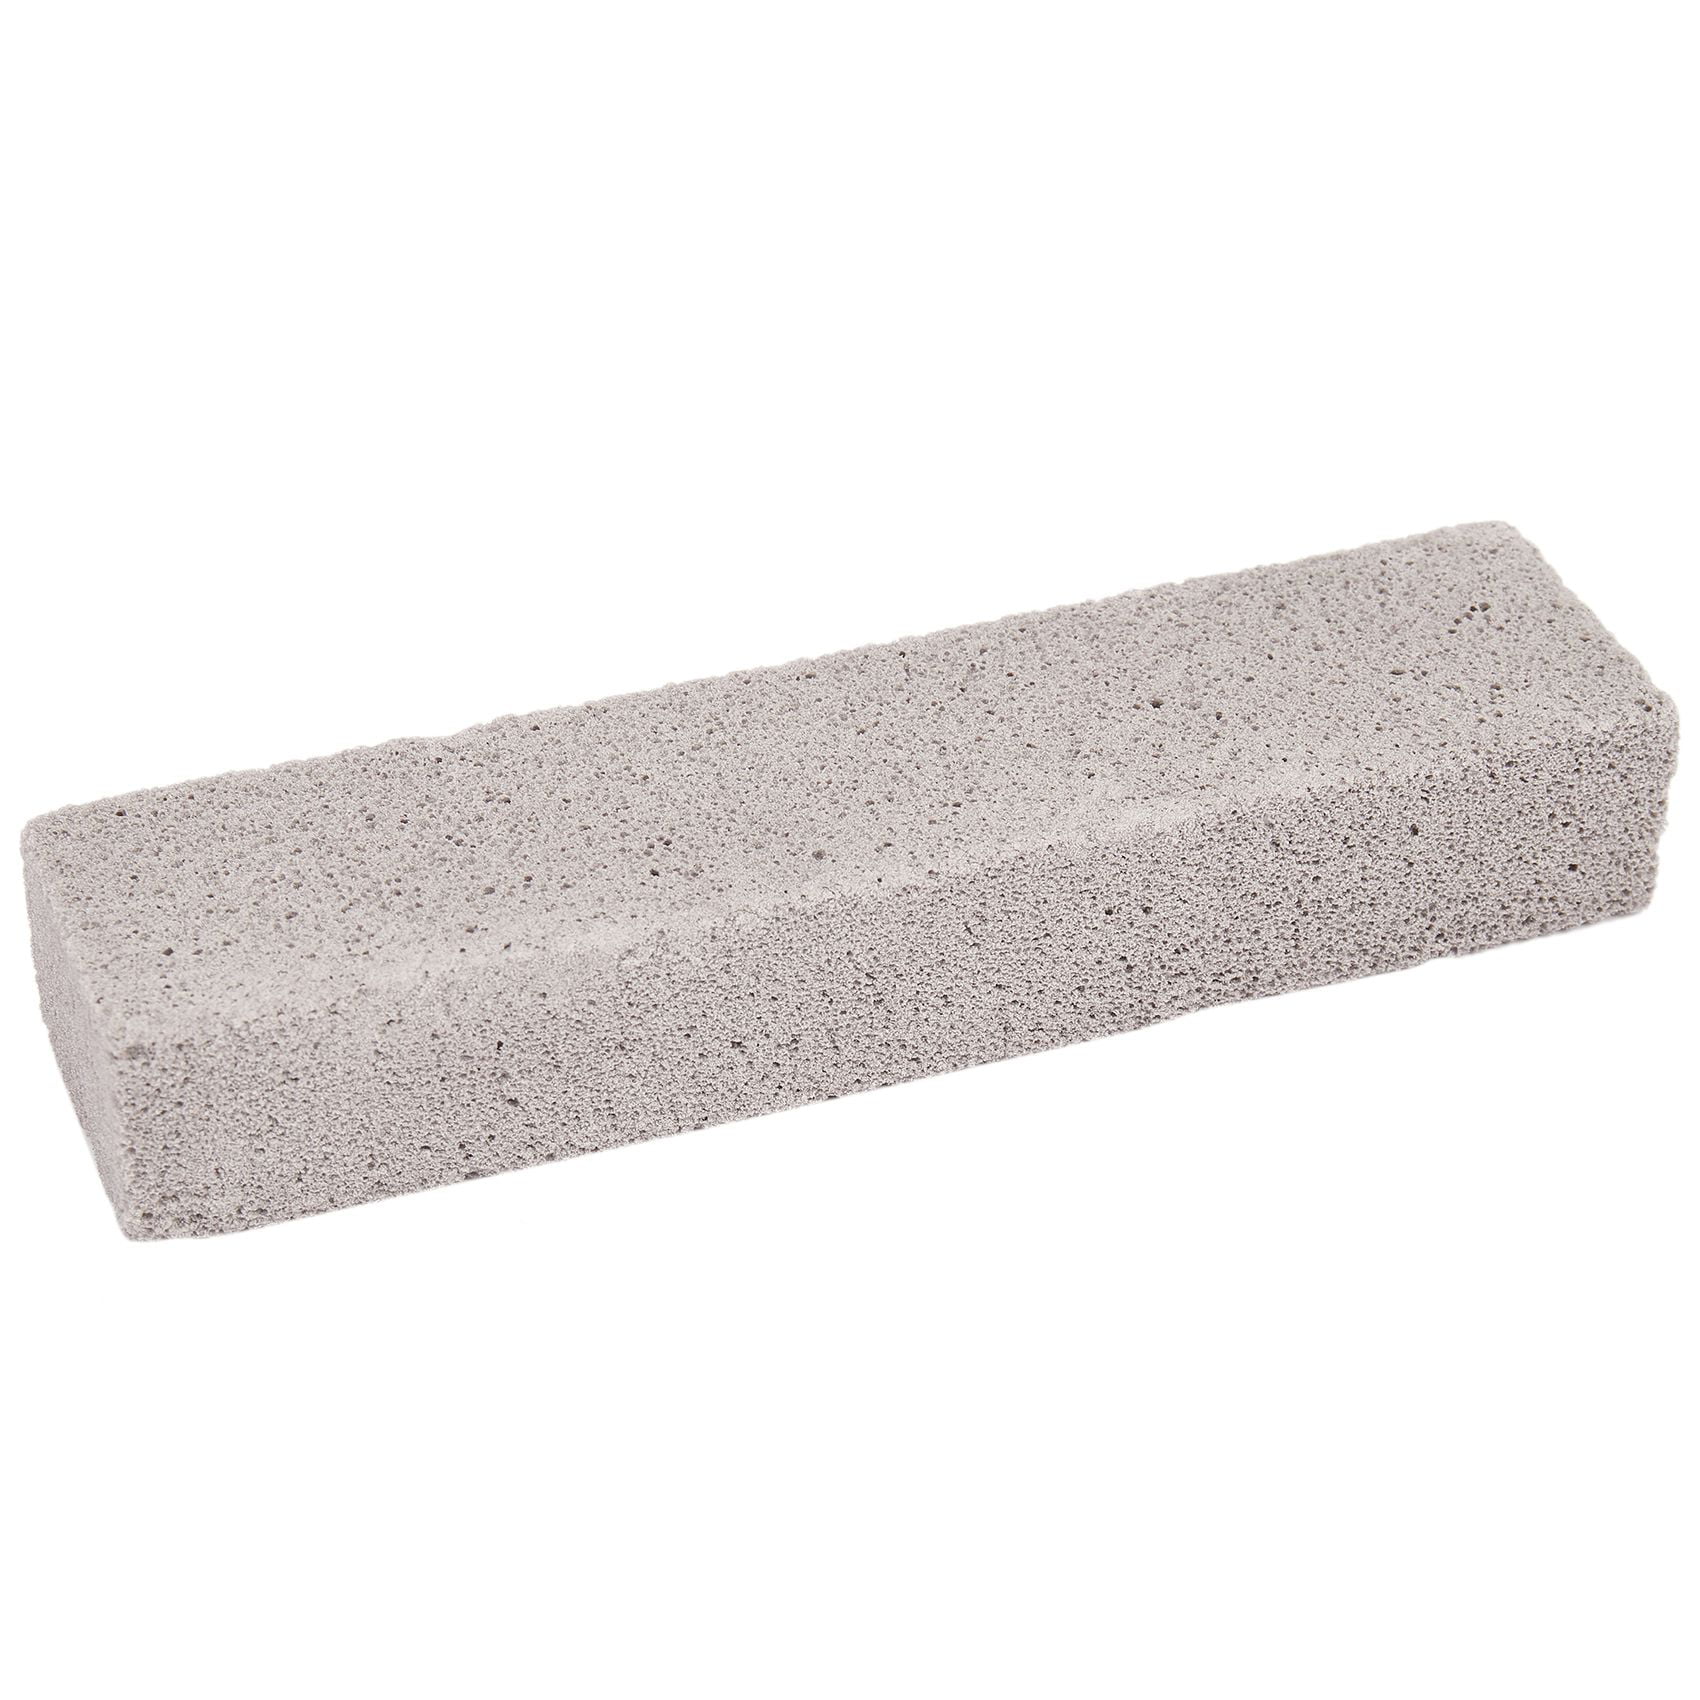 Pumice Stones Sticks Cleaner Grey Pumice Scouring Pad for Cleaning Toilets 